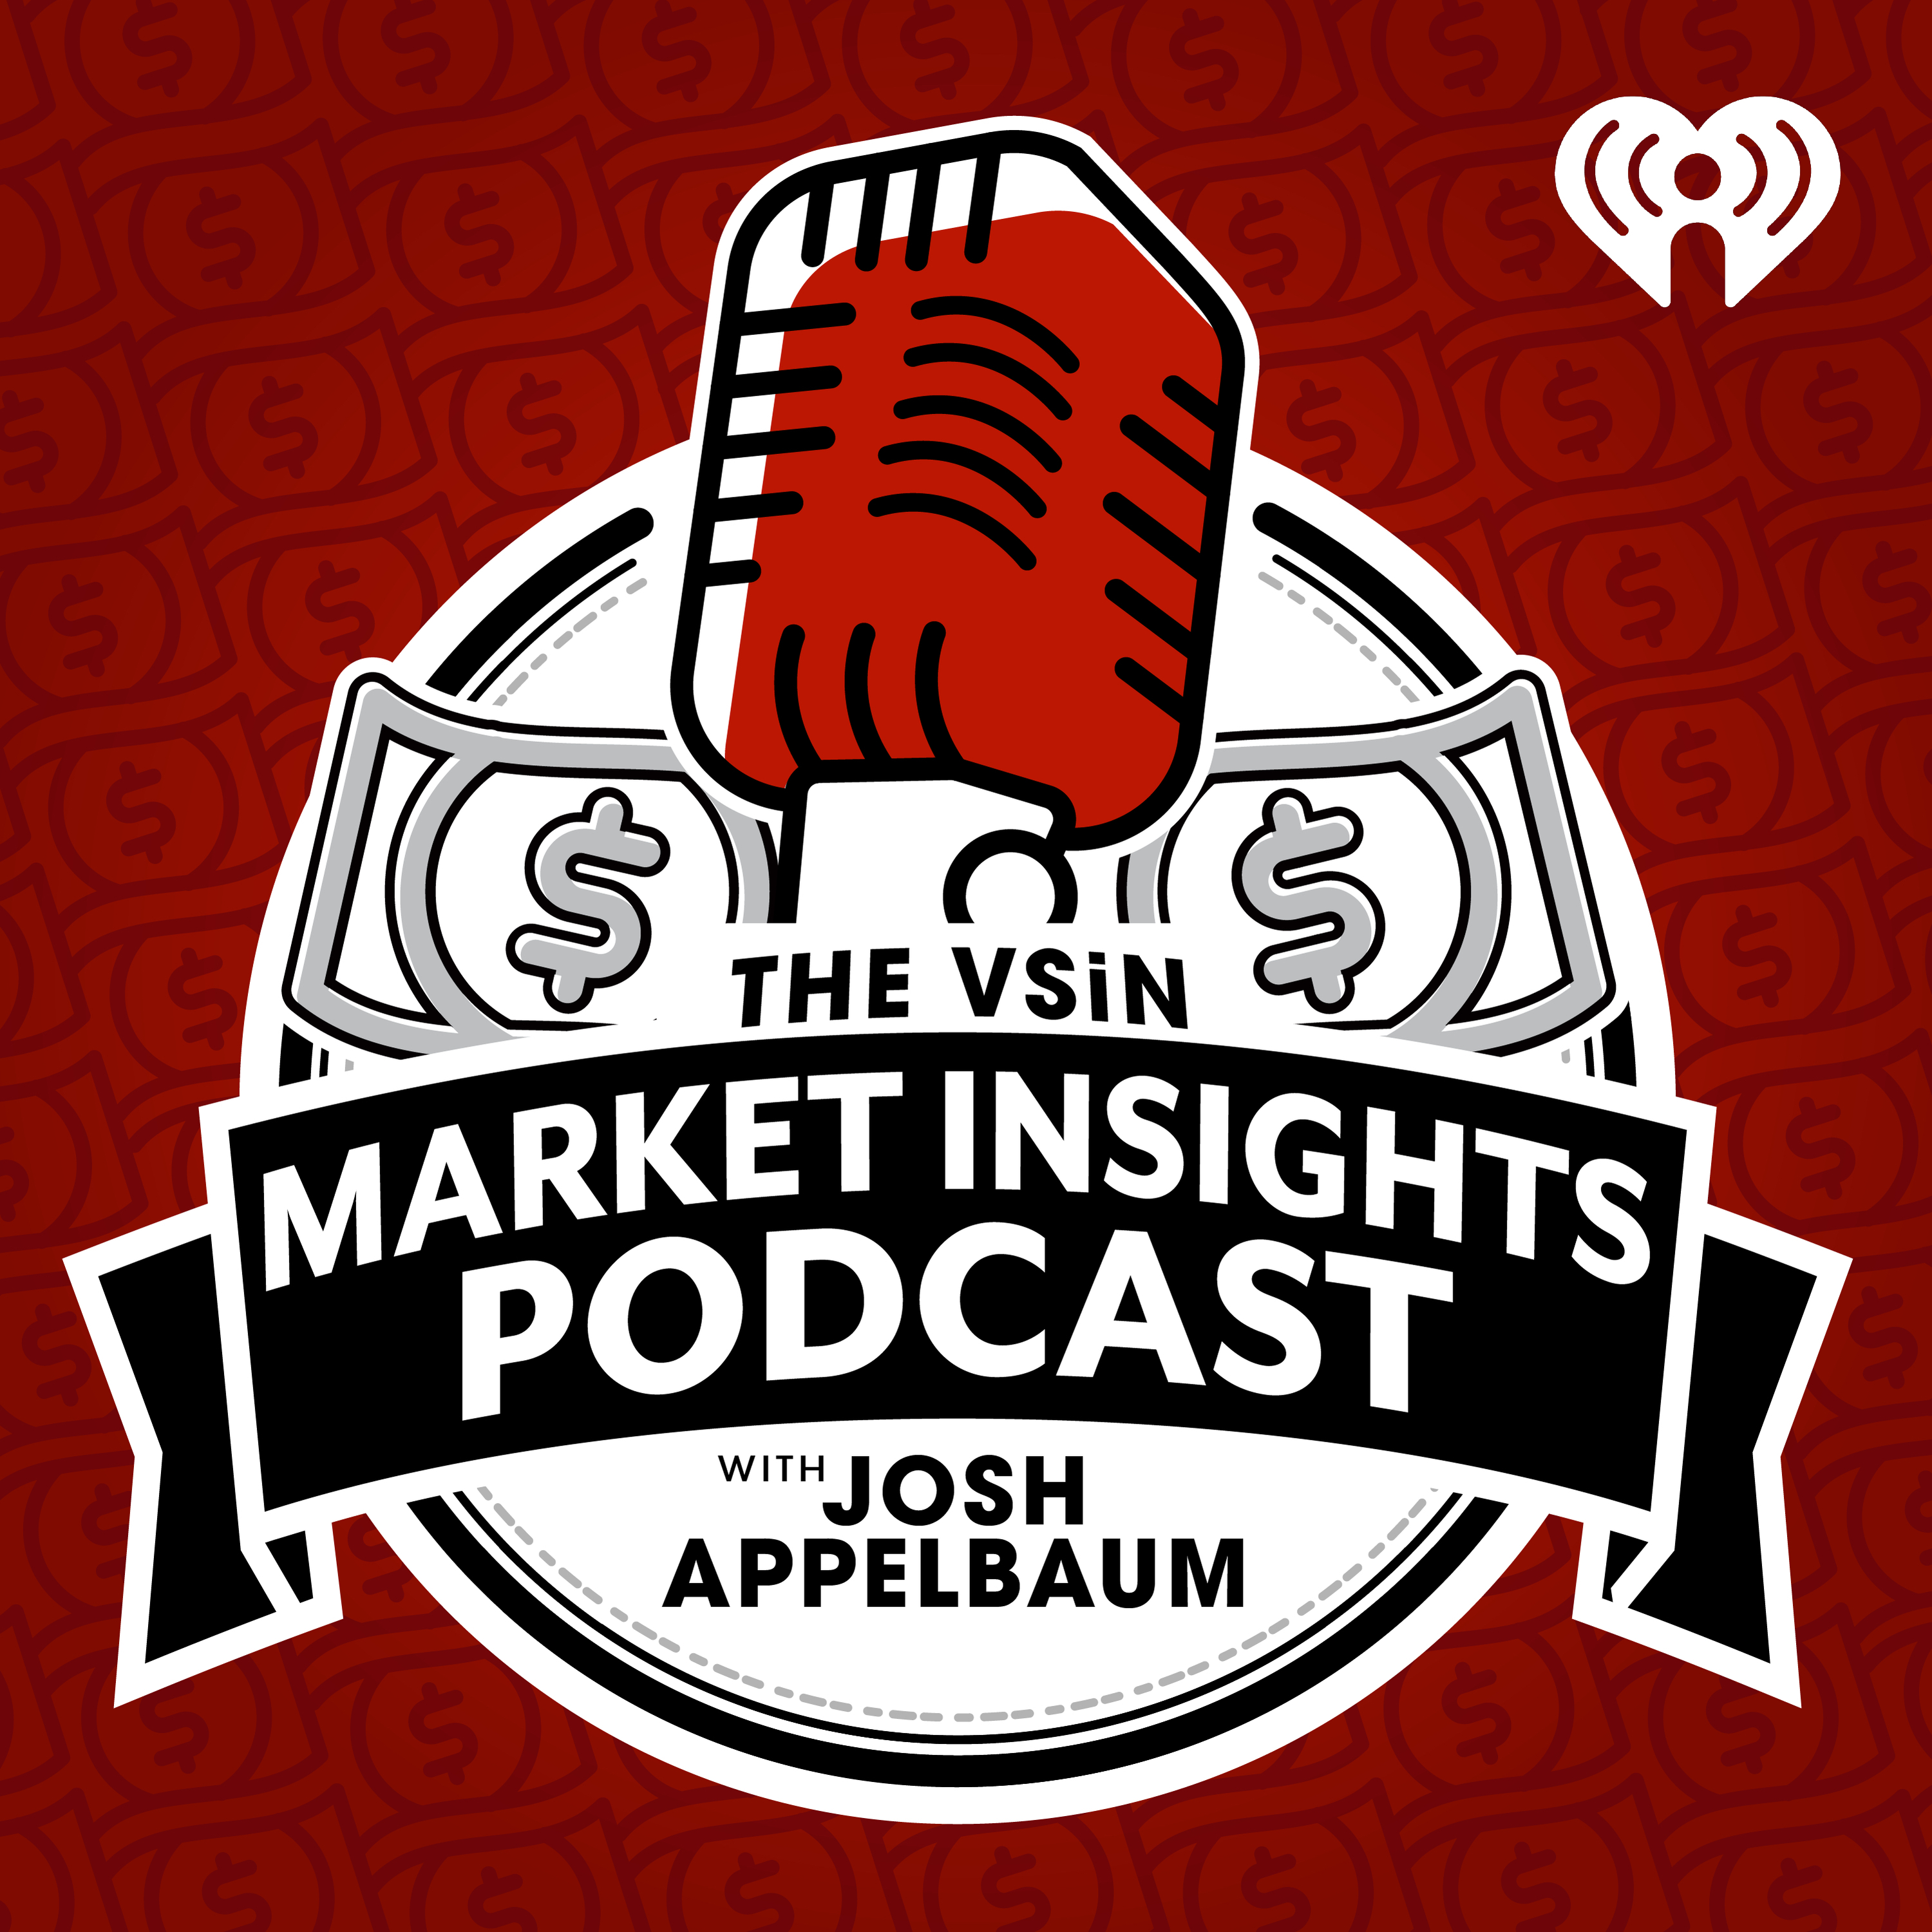 The VSiN Market Insights Podcast with Josh Appelbaum | March 15, 2022